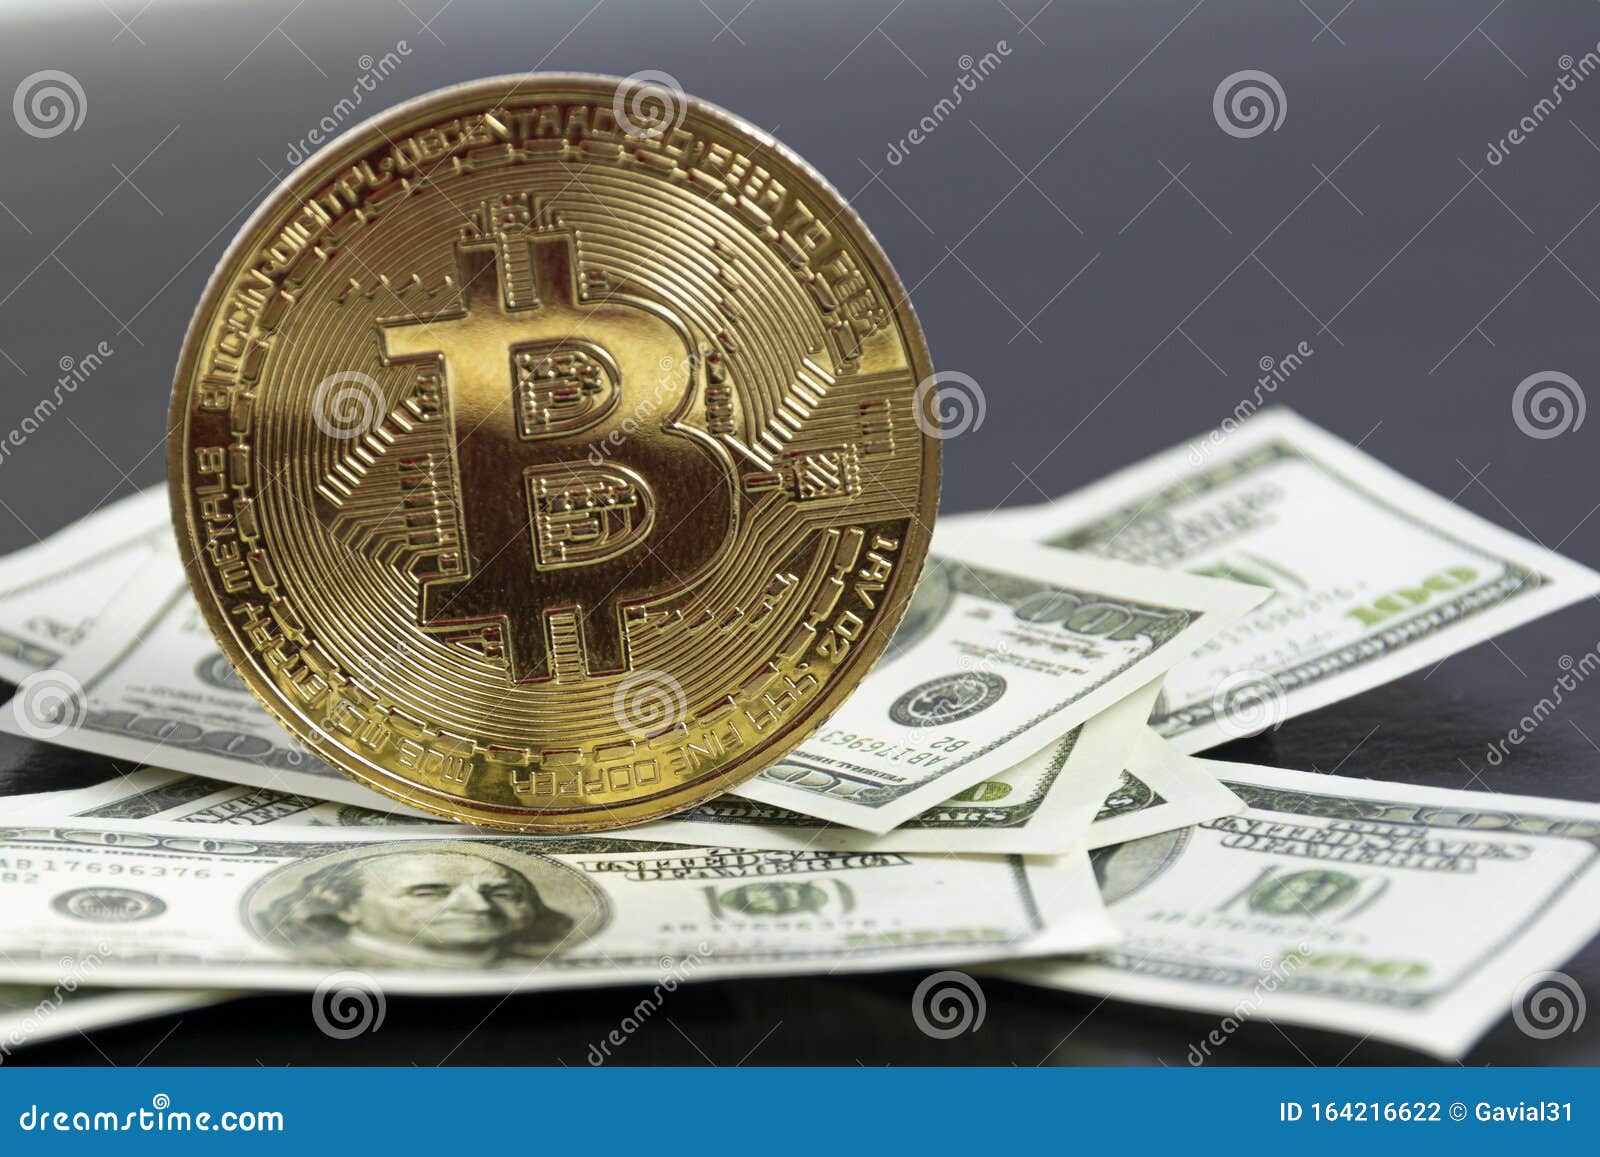 world coins bitcoins to dollars